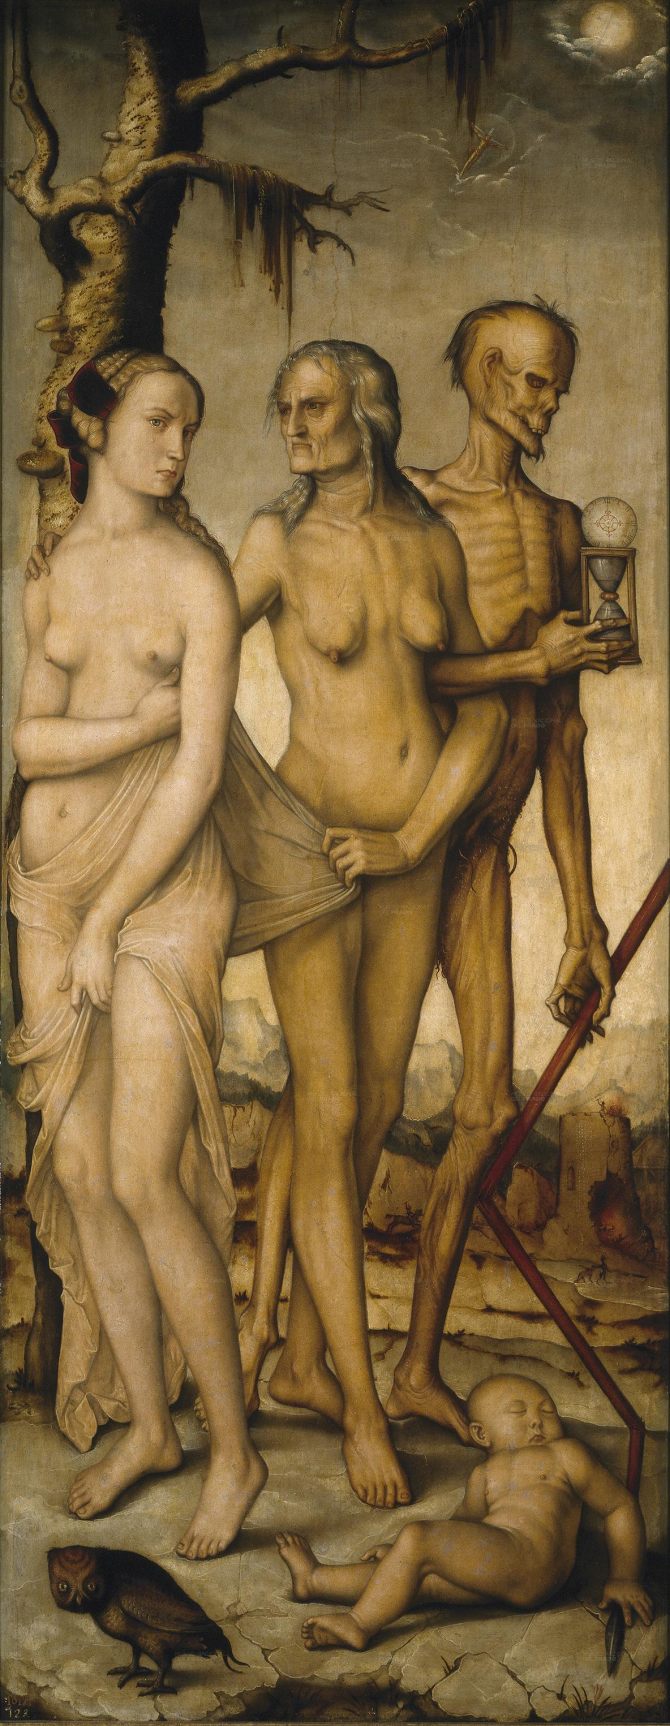 The Ages and Death (Baldung Grien, Hans)